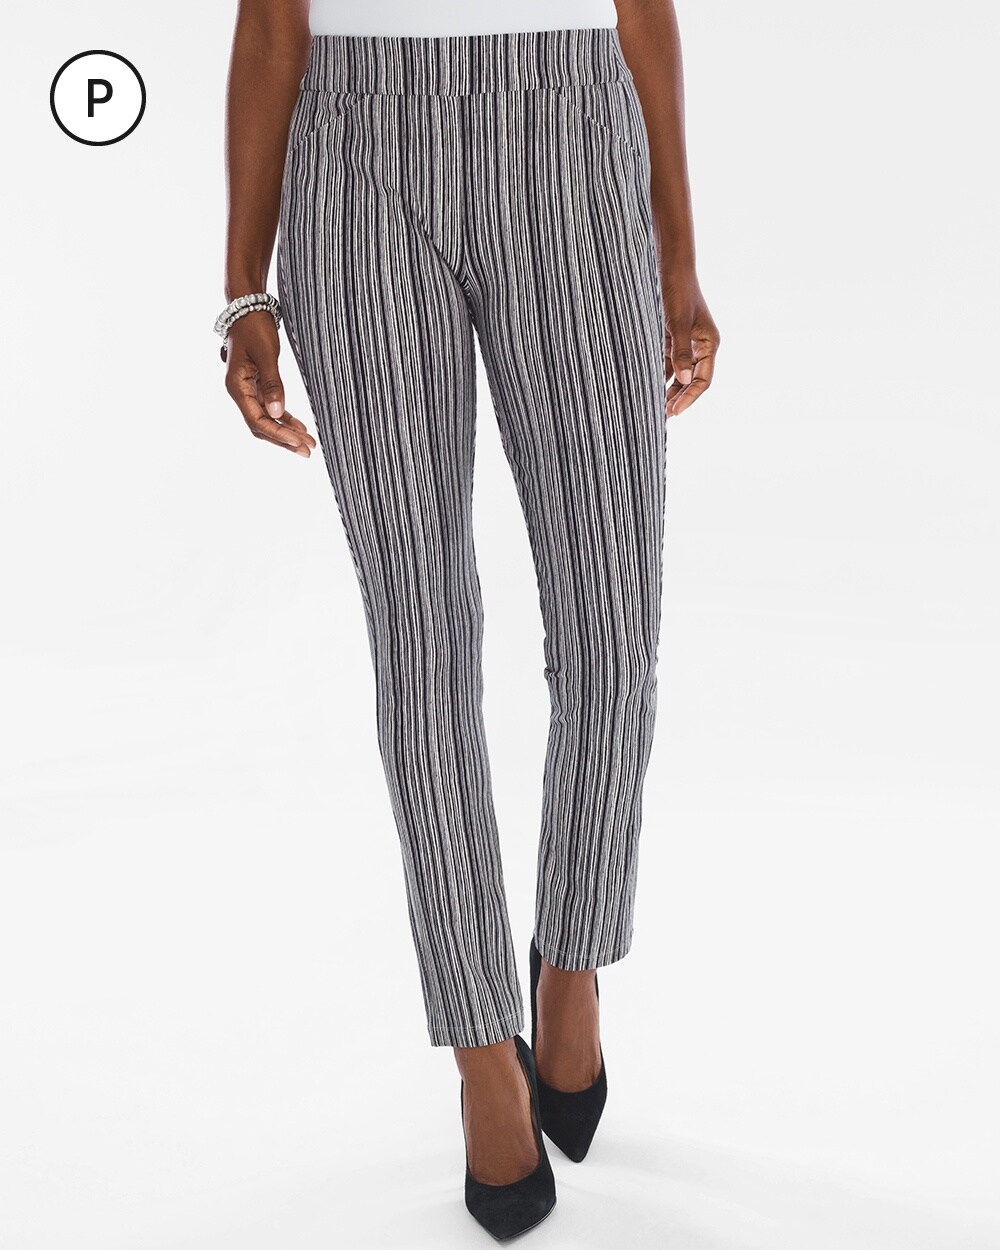 Travelers Collection Petite Striped Crepe Pants